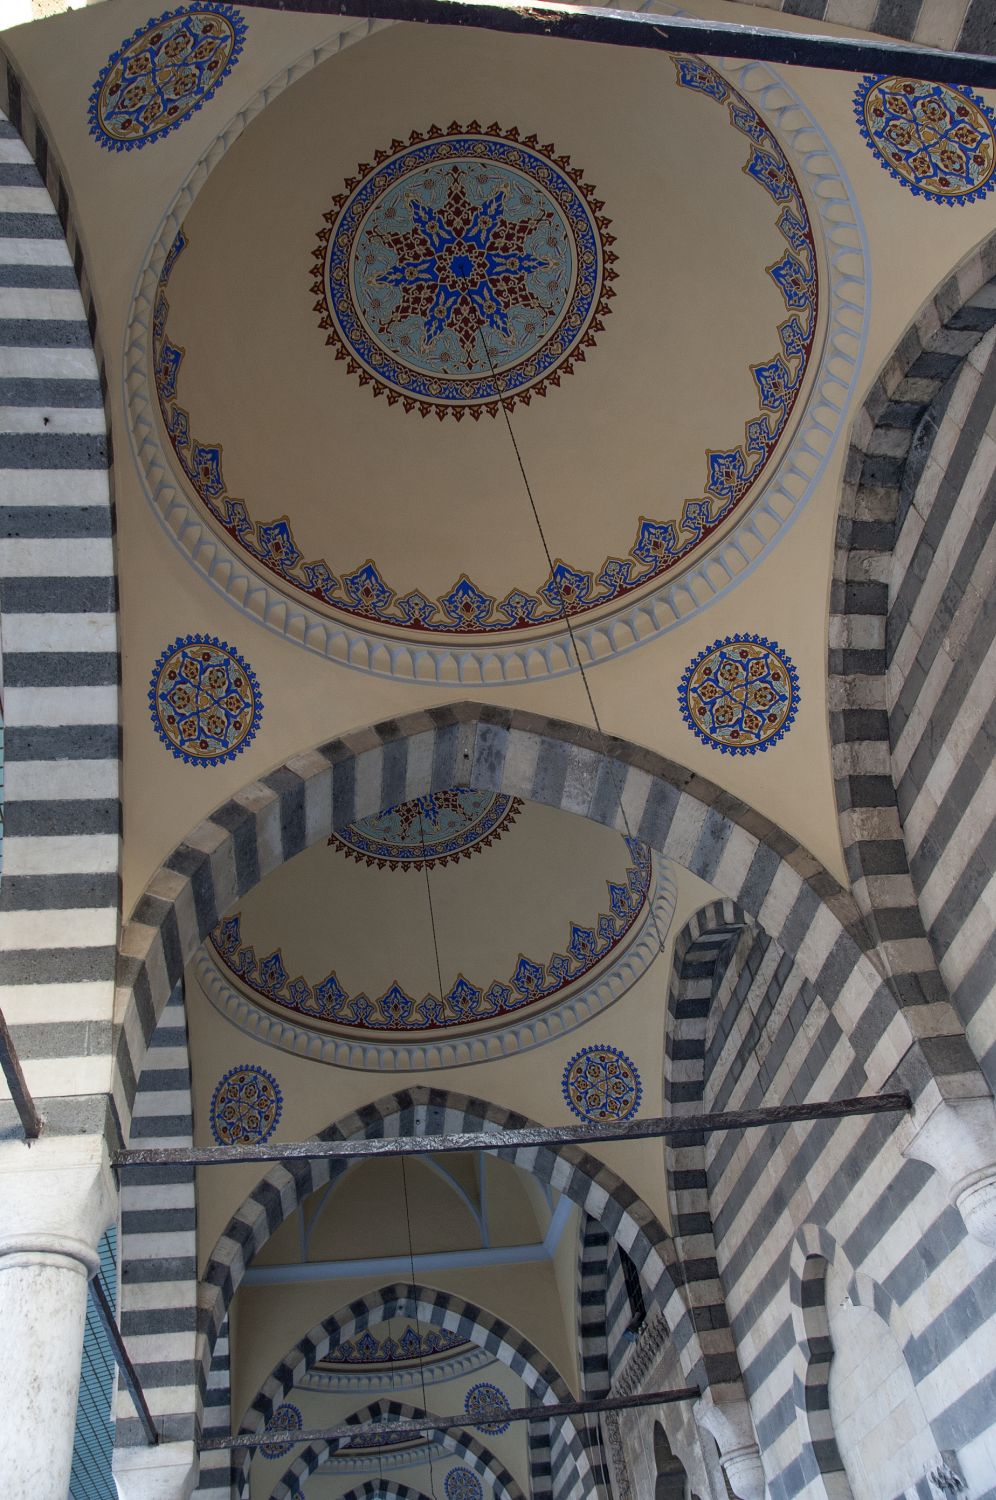 View of interior of portico showing domes above inner bays.